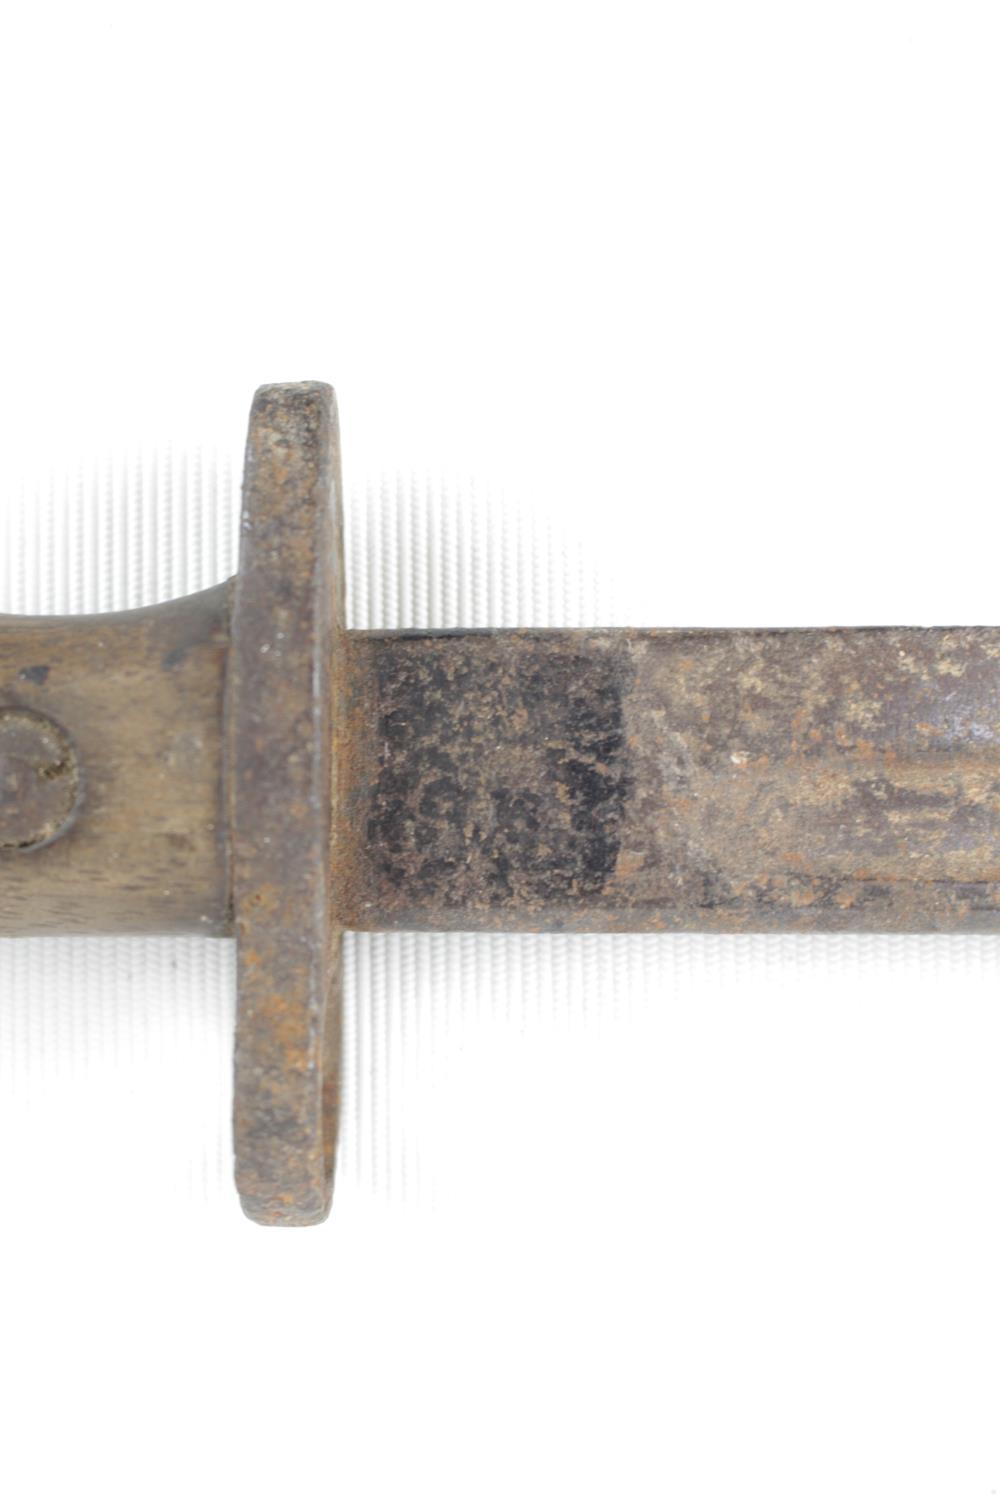 WW1 Long Bayonet without scabbard, 55cm in Length - Image 2 of 3